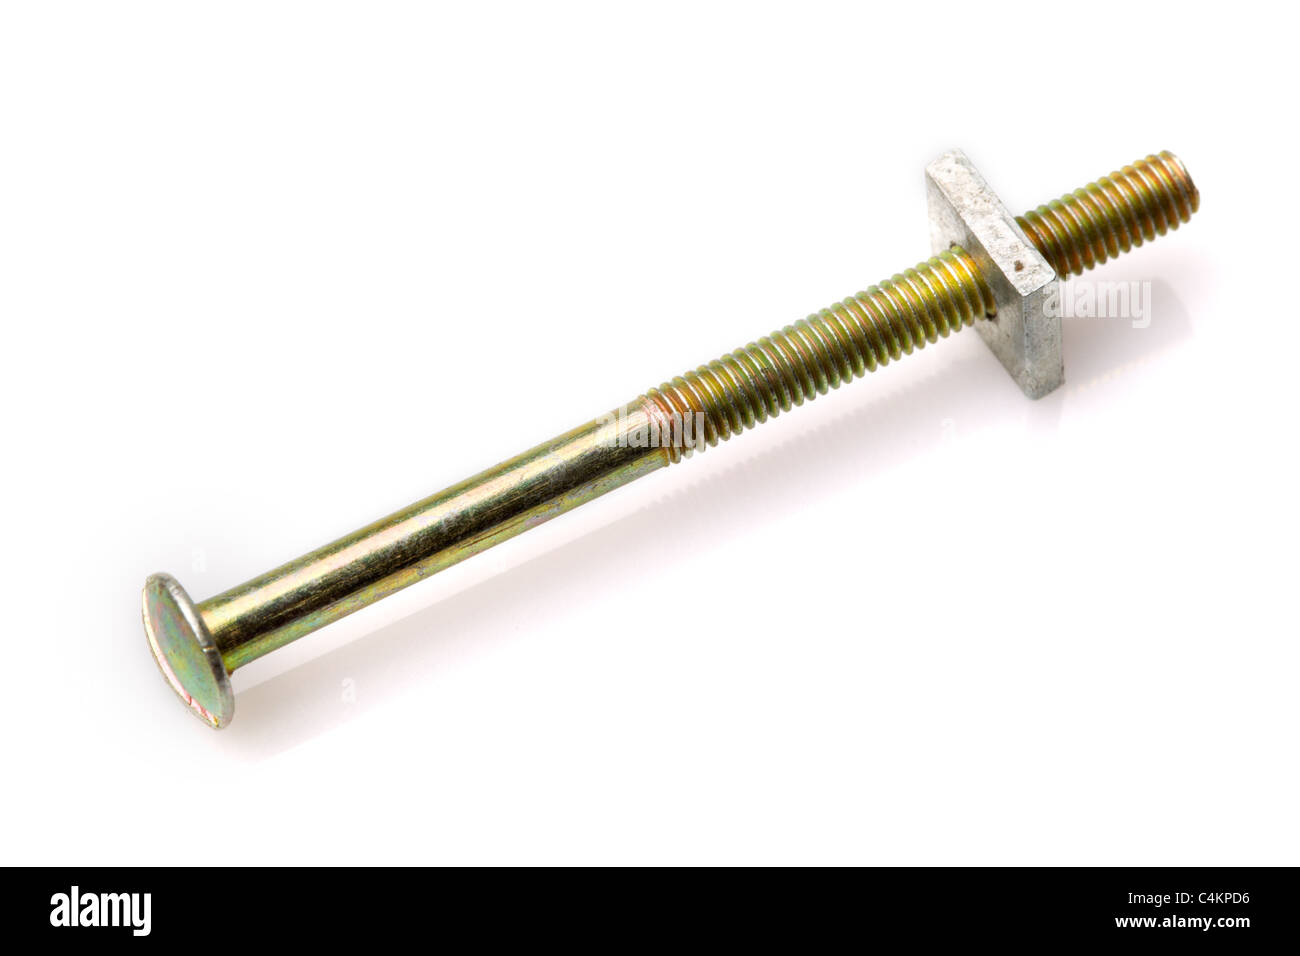 Screws And Nut With Small Step Thread Mostly Used In Electrical Machines Studio Isolated Shot Stock Photo